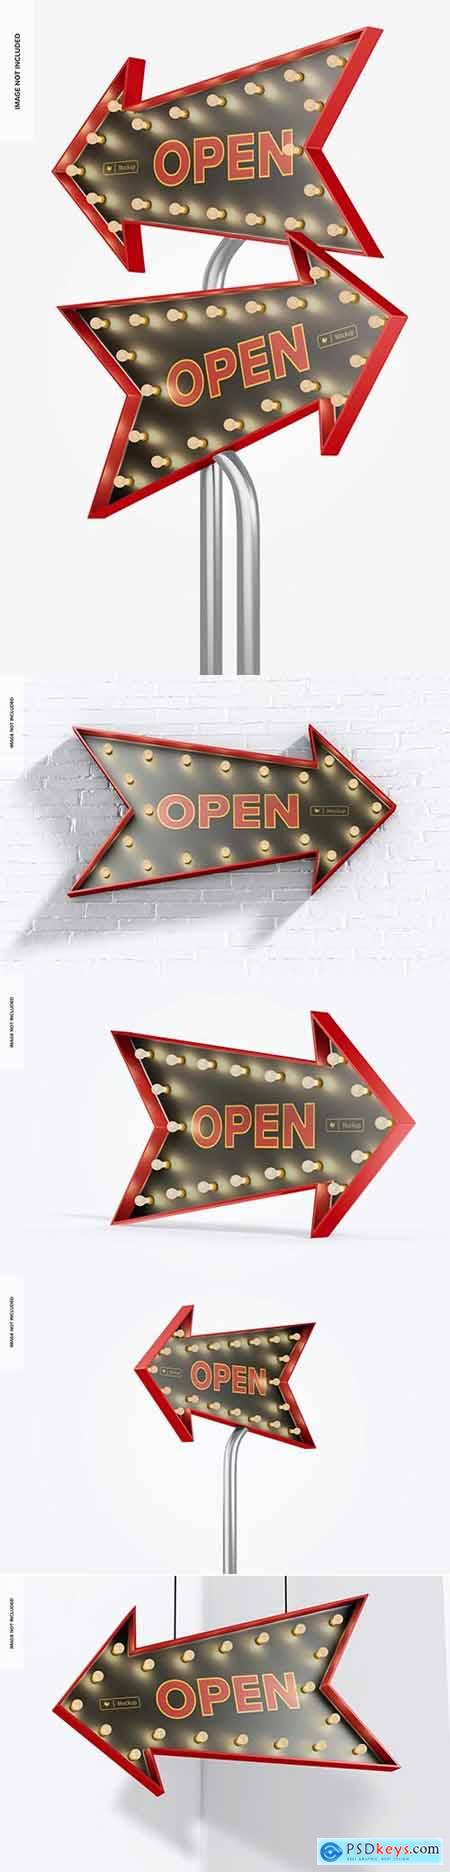 Luminous arrow promotional sign on stand mockup